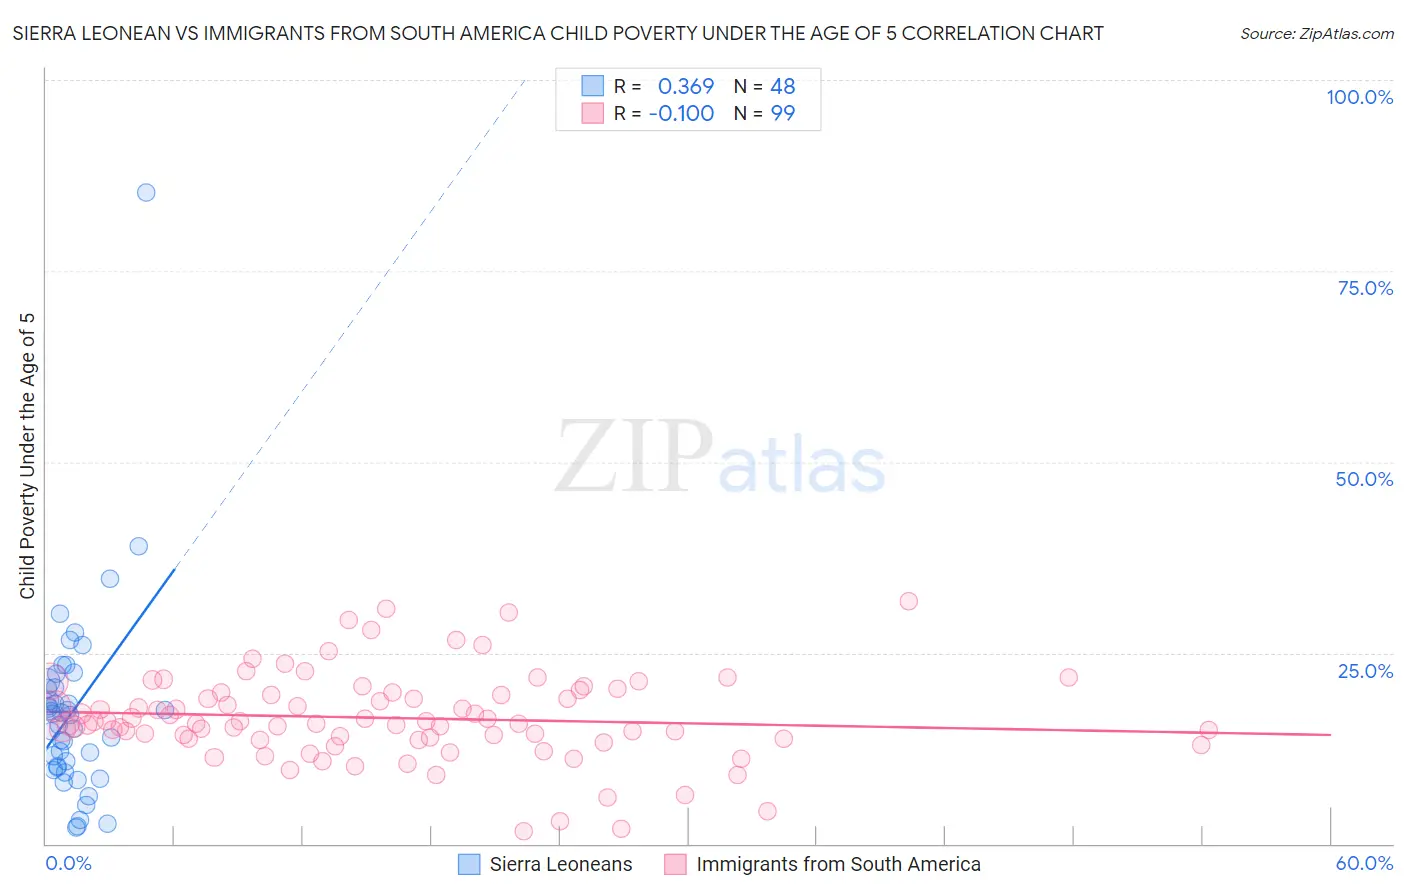 Sierra Leonean vs Immigrants from South America Child Poverty Under the Age of 5